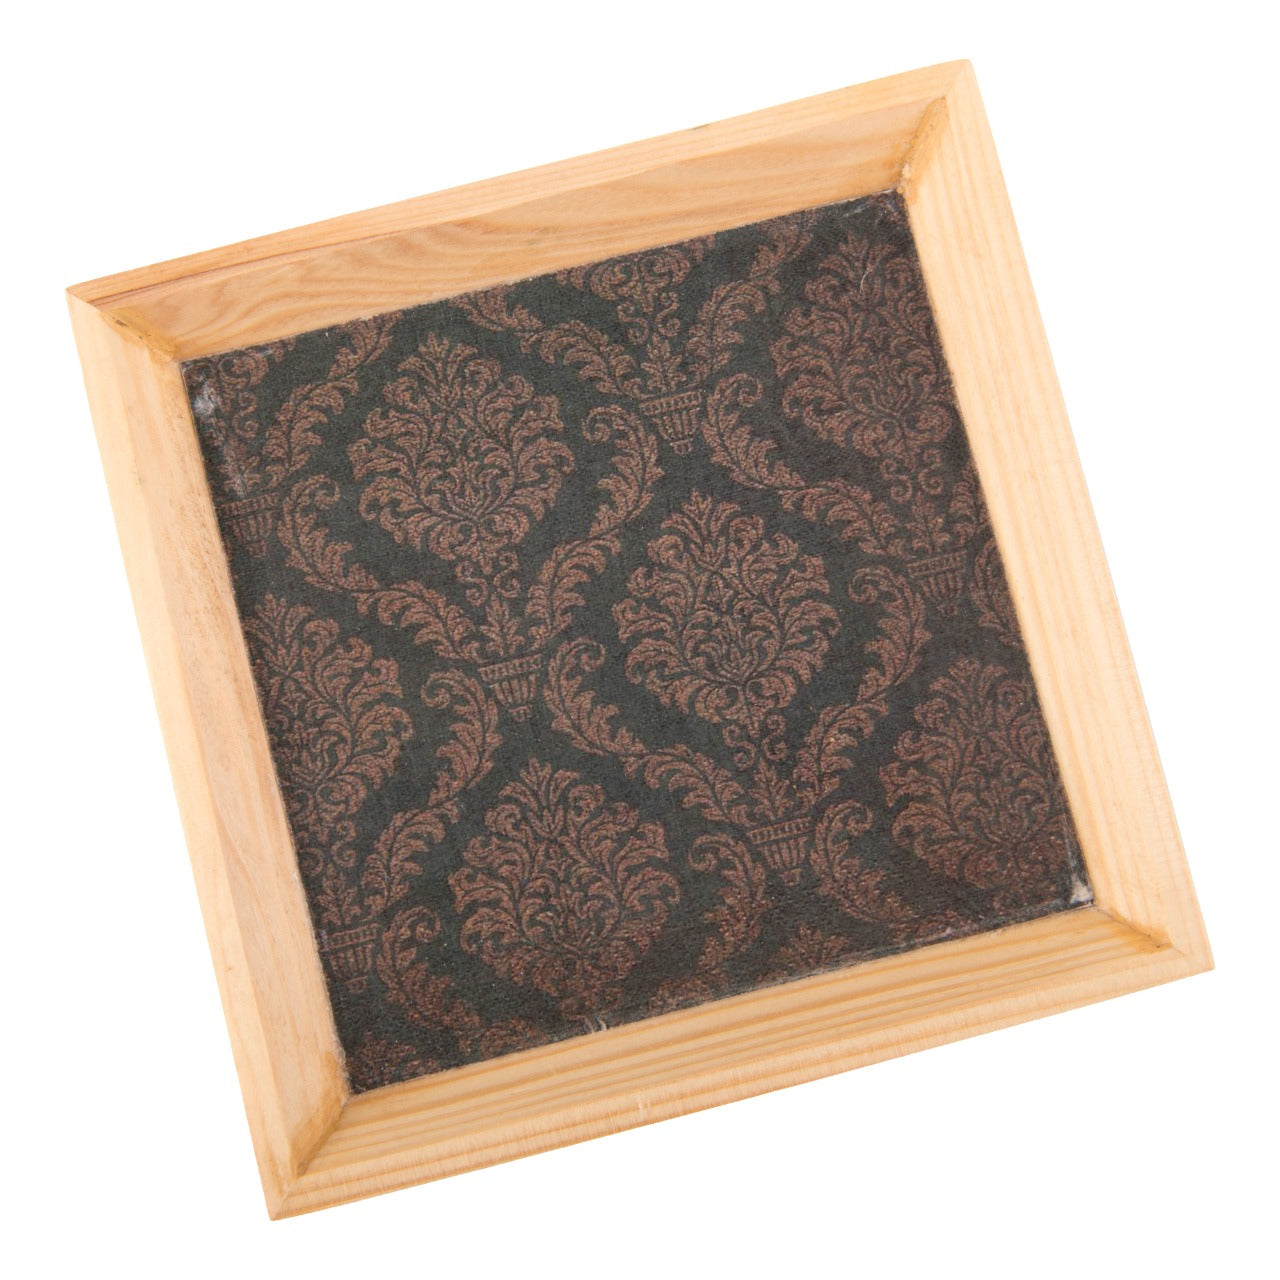 A Tiny Mistake Olive Green & Gold Royal Motifs Pattern Small Square Wooden Serving Tray, 18 x 18 x 2 cm